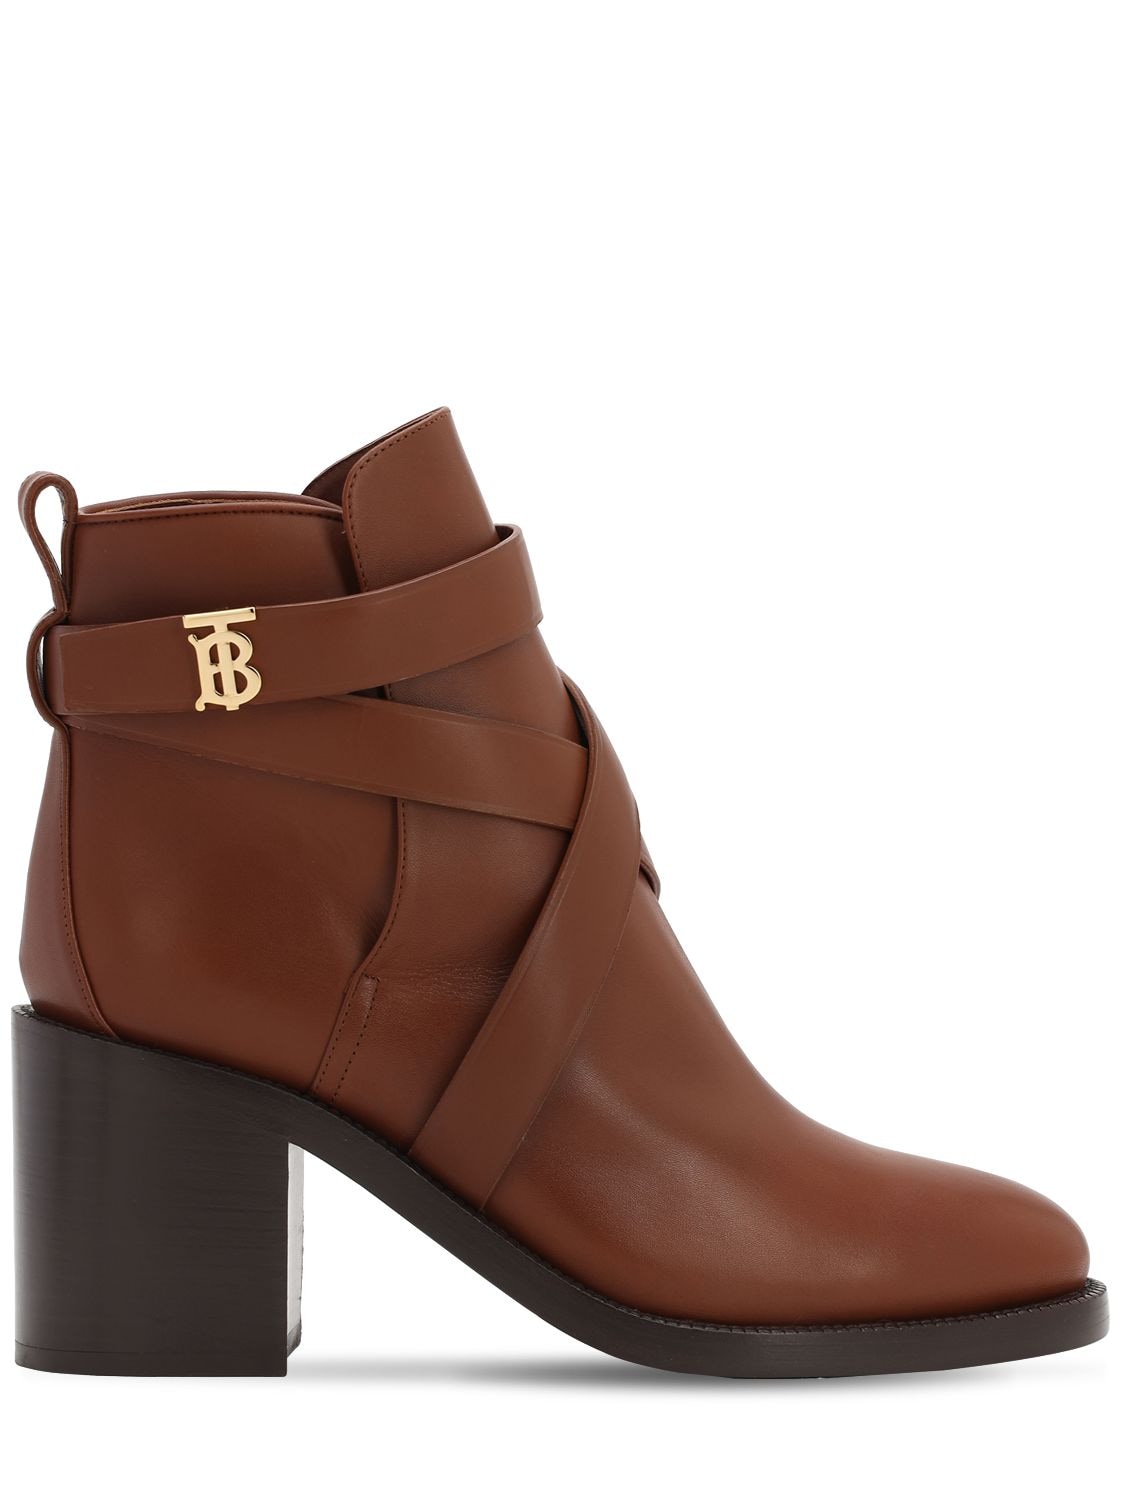 burberry buckled leather ankle boots